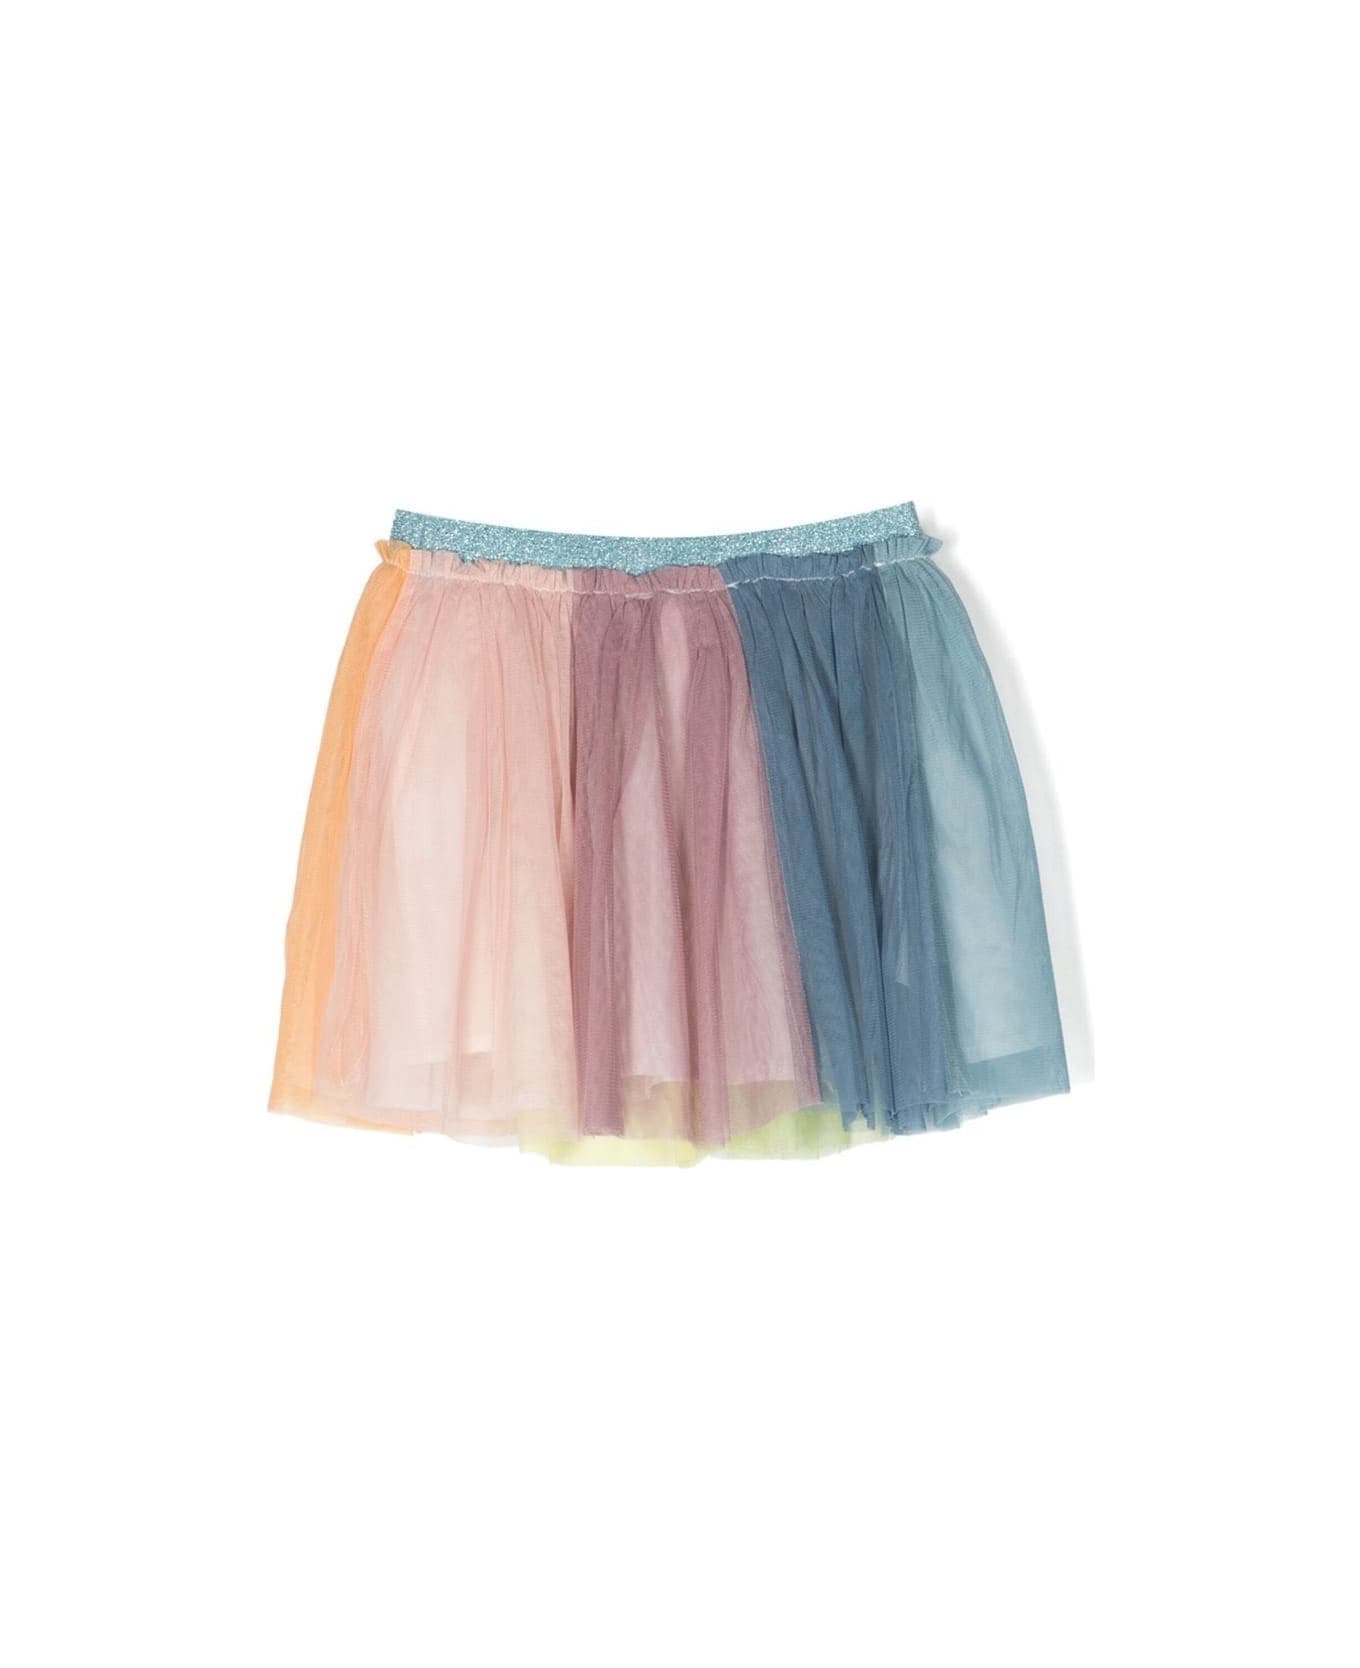 Stella McCartney Kids Tutù-skirt With Metallic Waistband Multicolor In Tulle Girl - Multicolor ボトムス